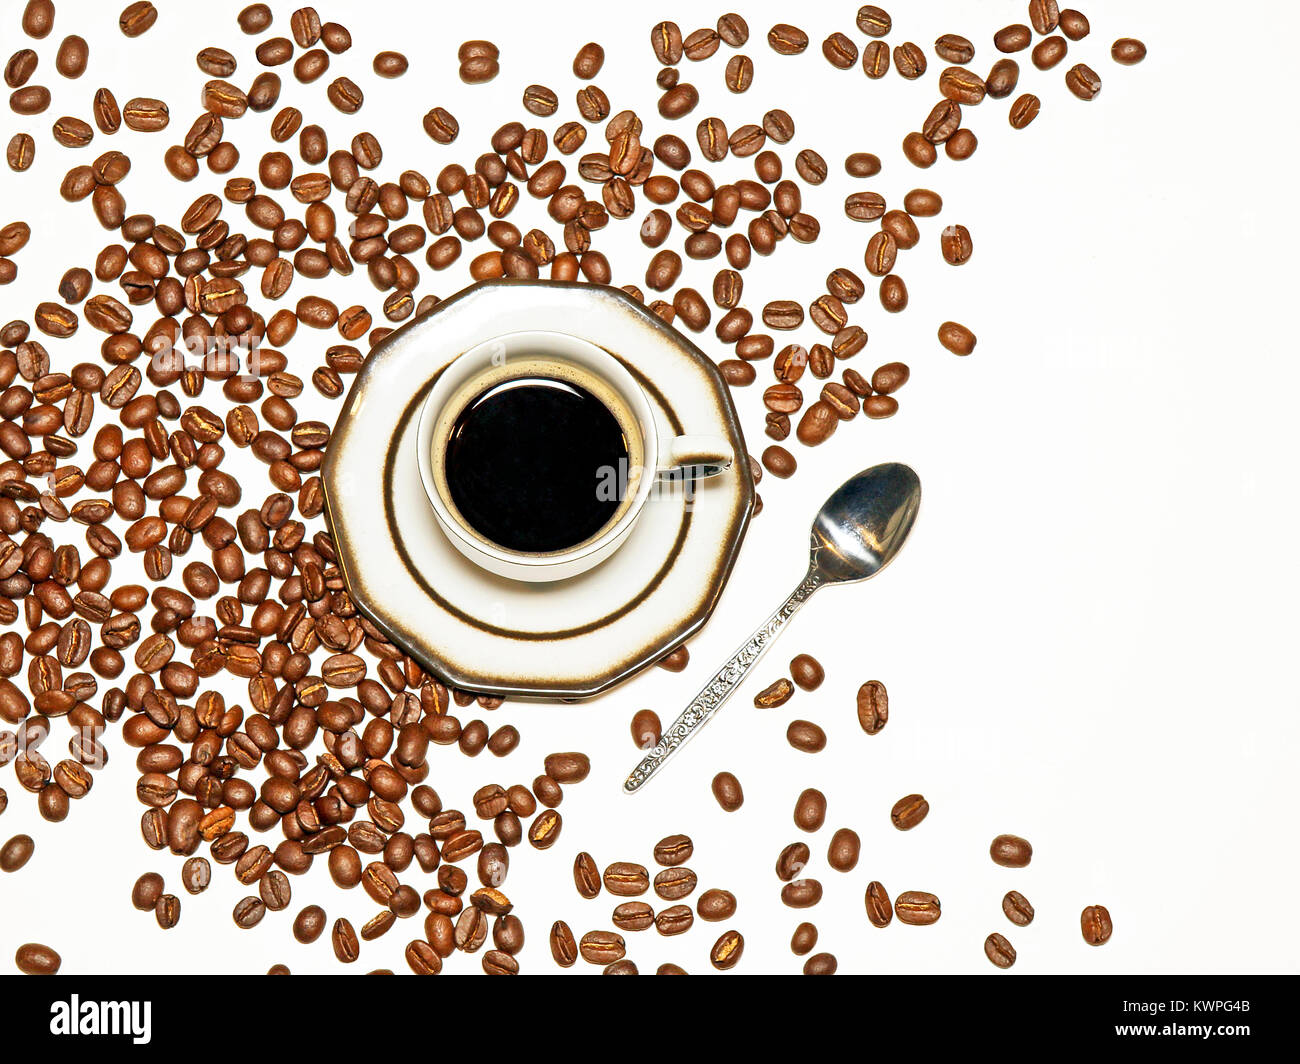 Cup of Coffee Espresso on white background with Coffee Beans spread around, with free space on right image side. Stock Photo